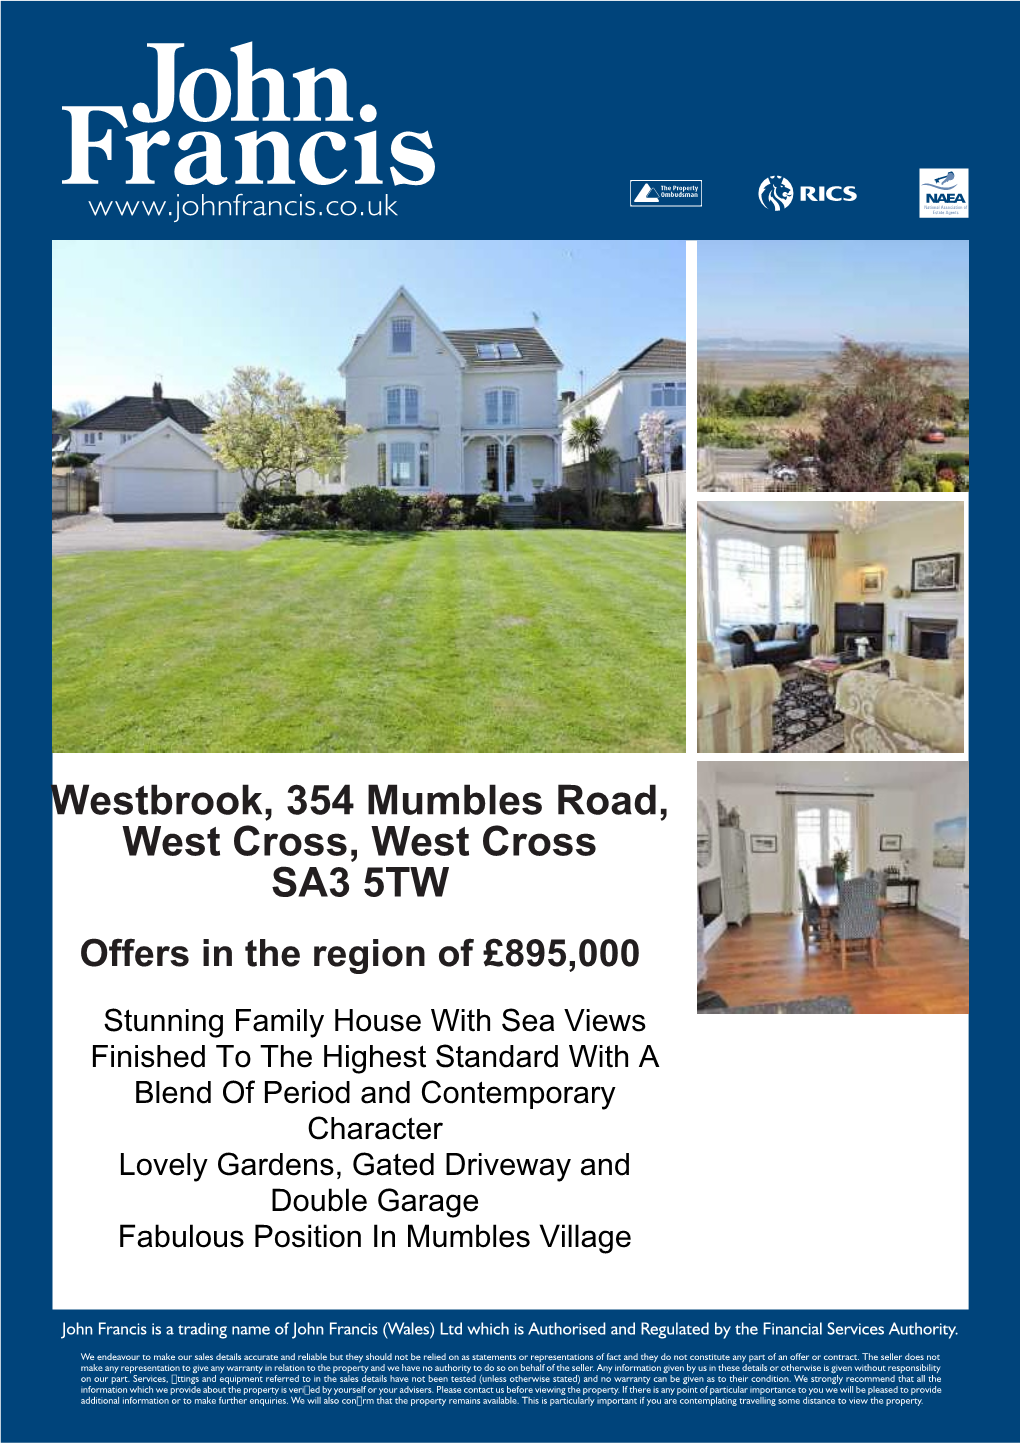 Westbrook, 354 Mumbles Road, West Cross, West Cross SA3 5TW Offers in the Region of £895,000